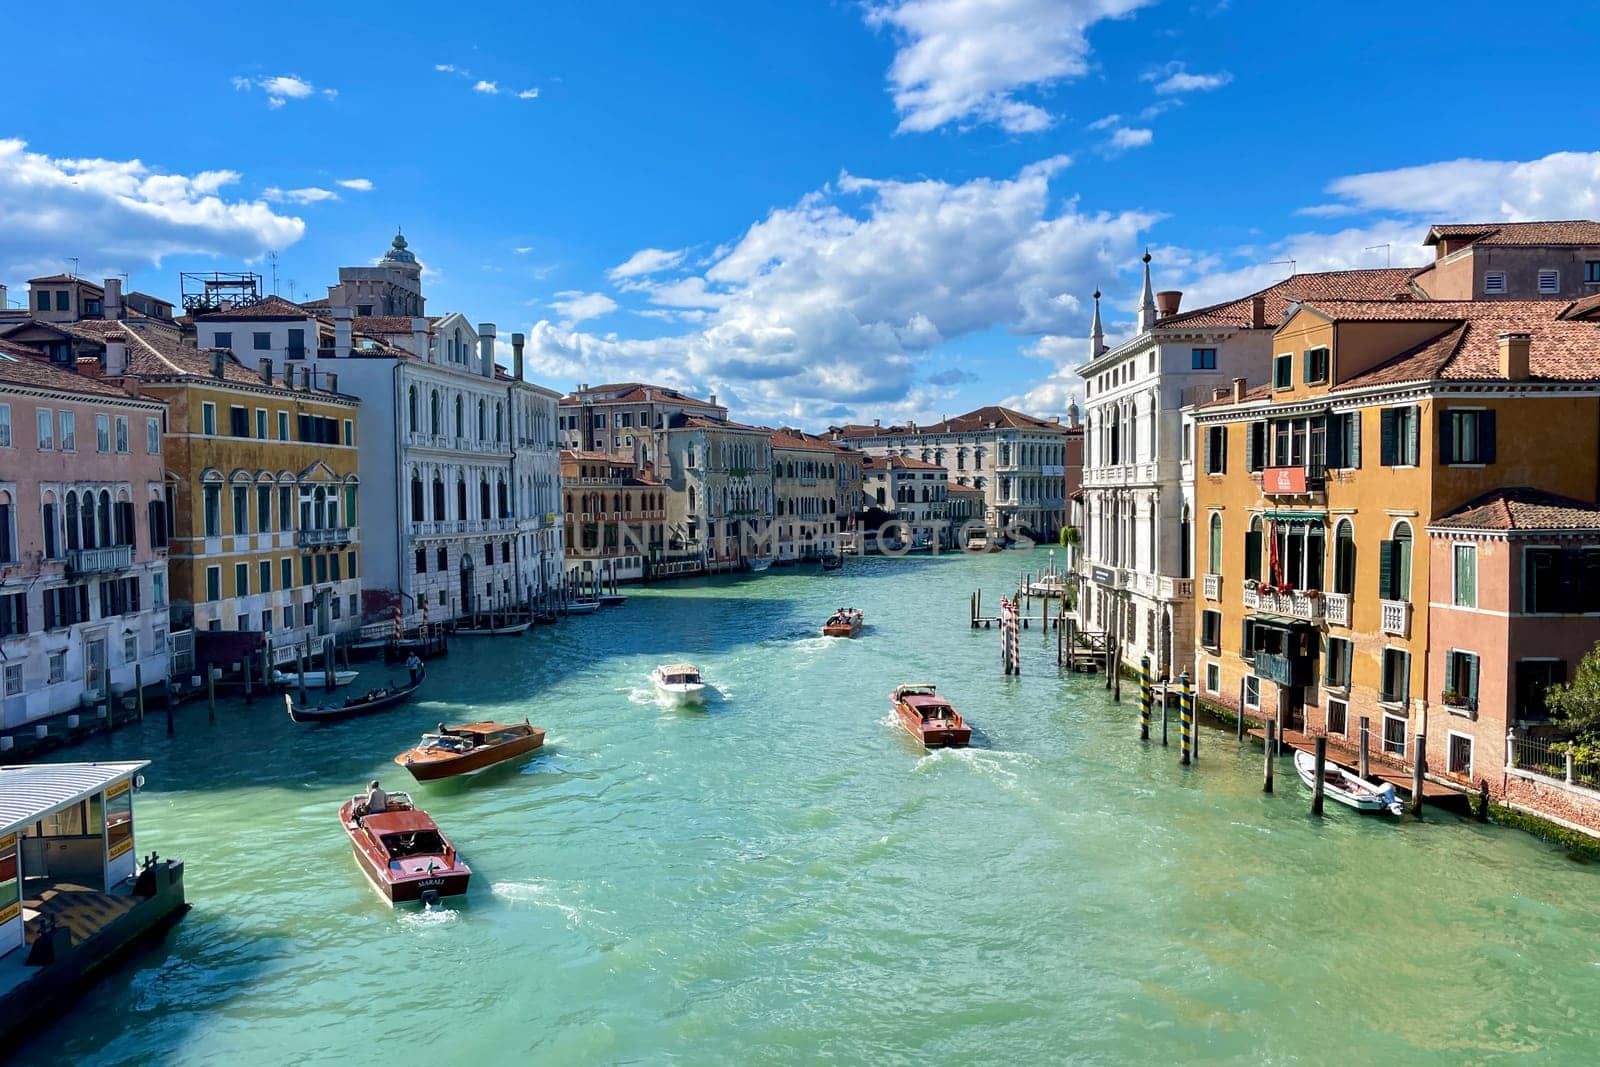 View from the big bridge on the Grand Canal, the most famous channel of Venice between the islands of the lagoon